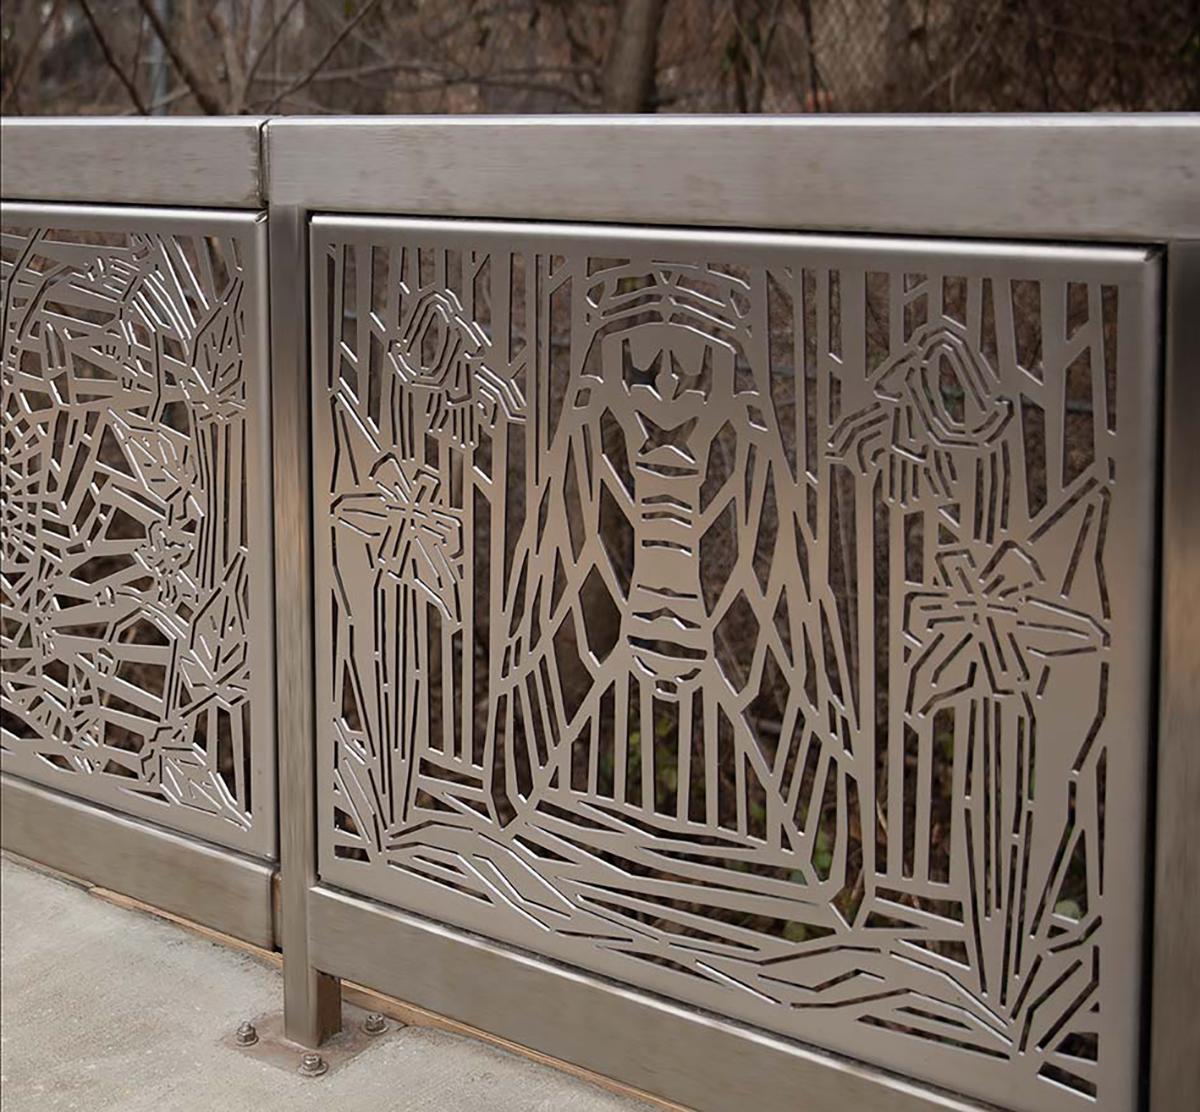 Photograph of metal artwork at SIR Richmond Valley station. The stainless steel artwork panel along the station railing depicts local wildlife and nature.